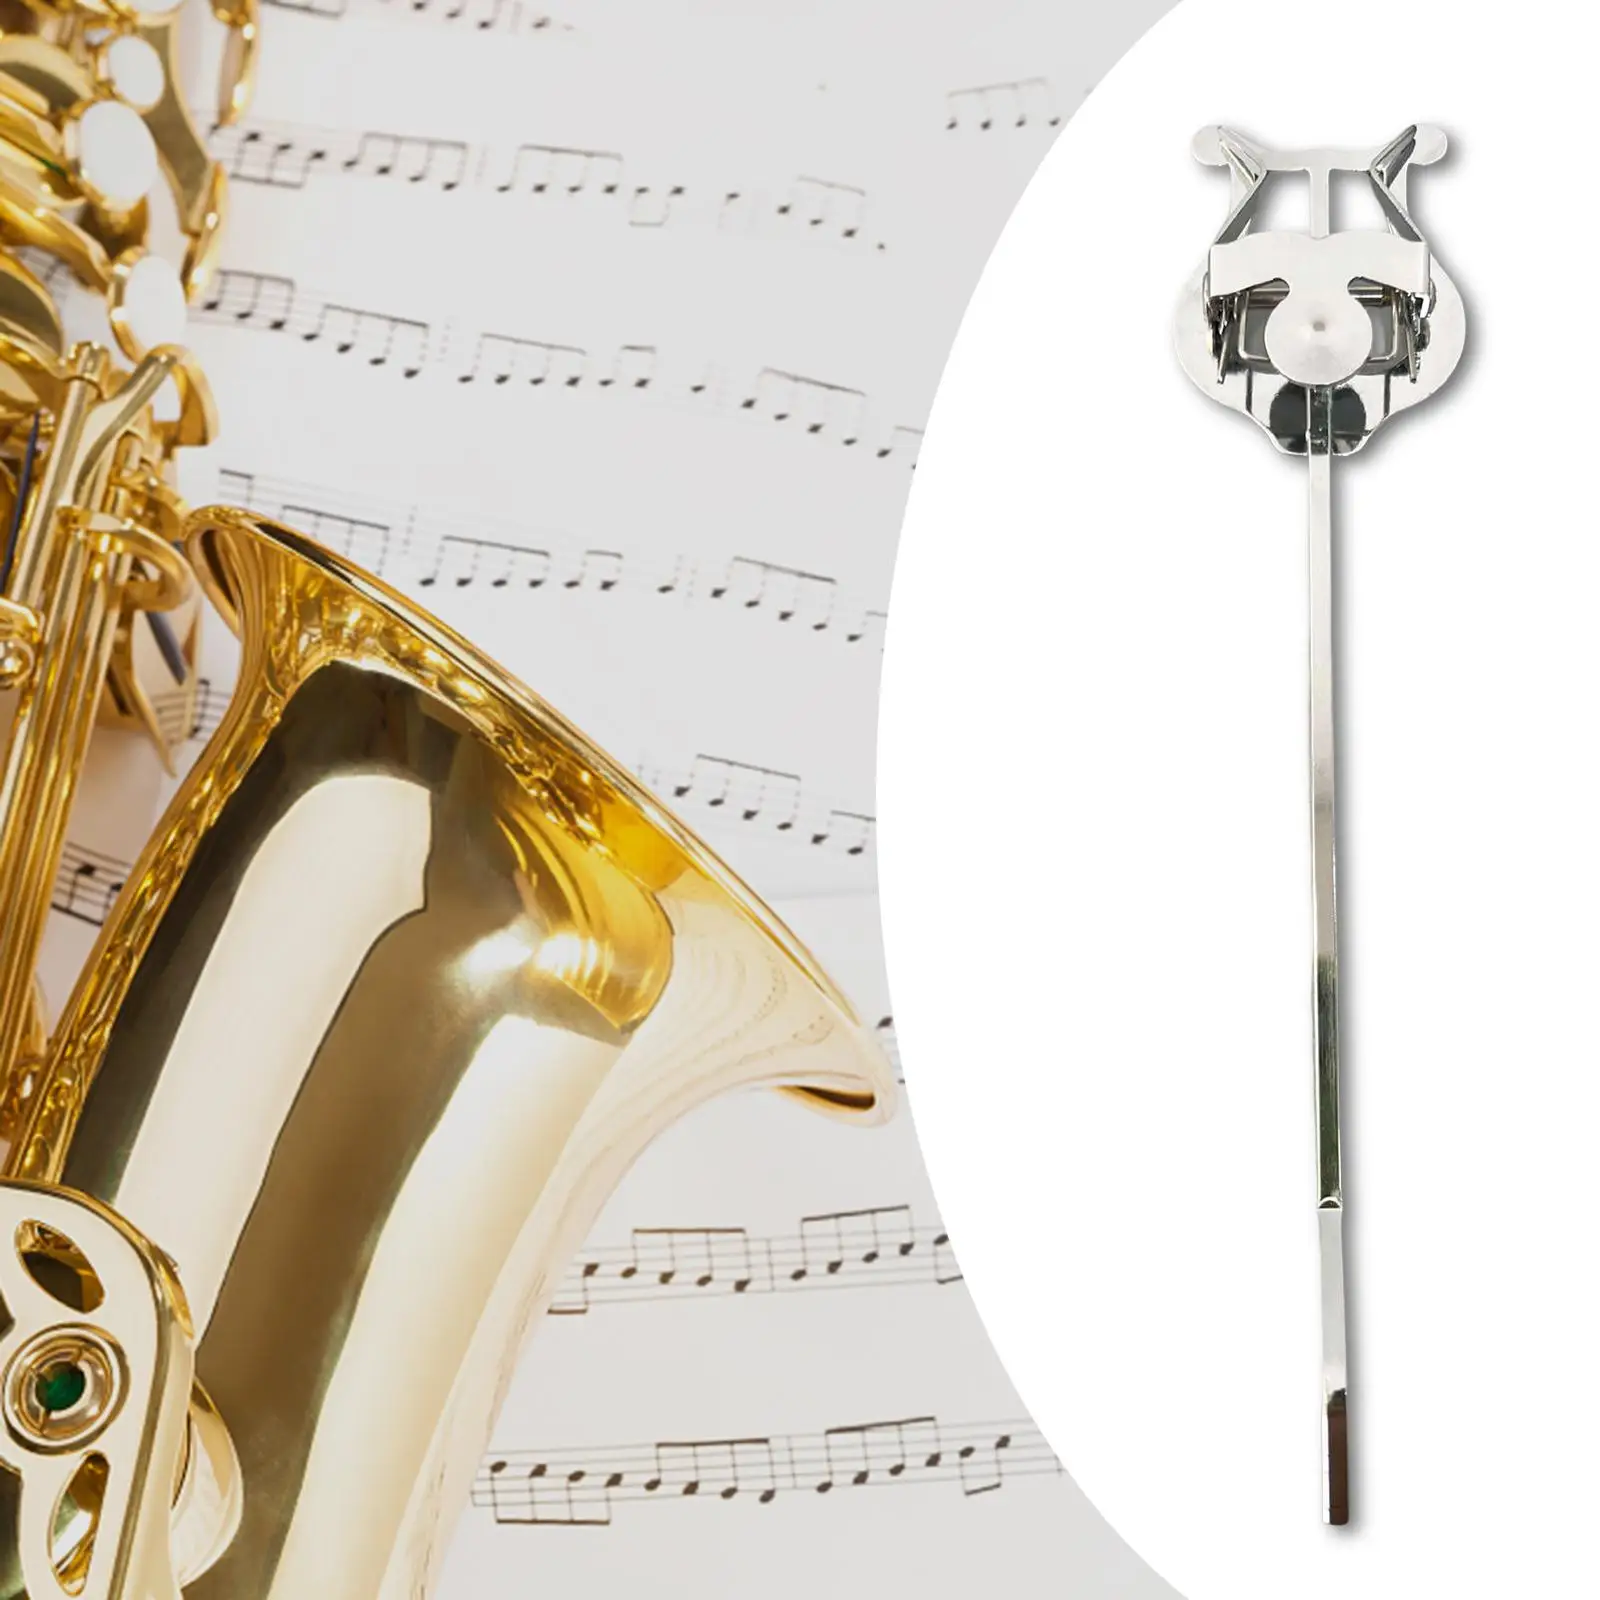 Marching Lyre Clamp Trumpet Marching Clamp Trumpet Sheet Music Clip for Saxophone